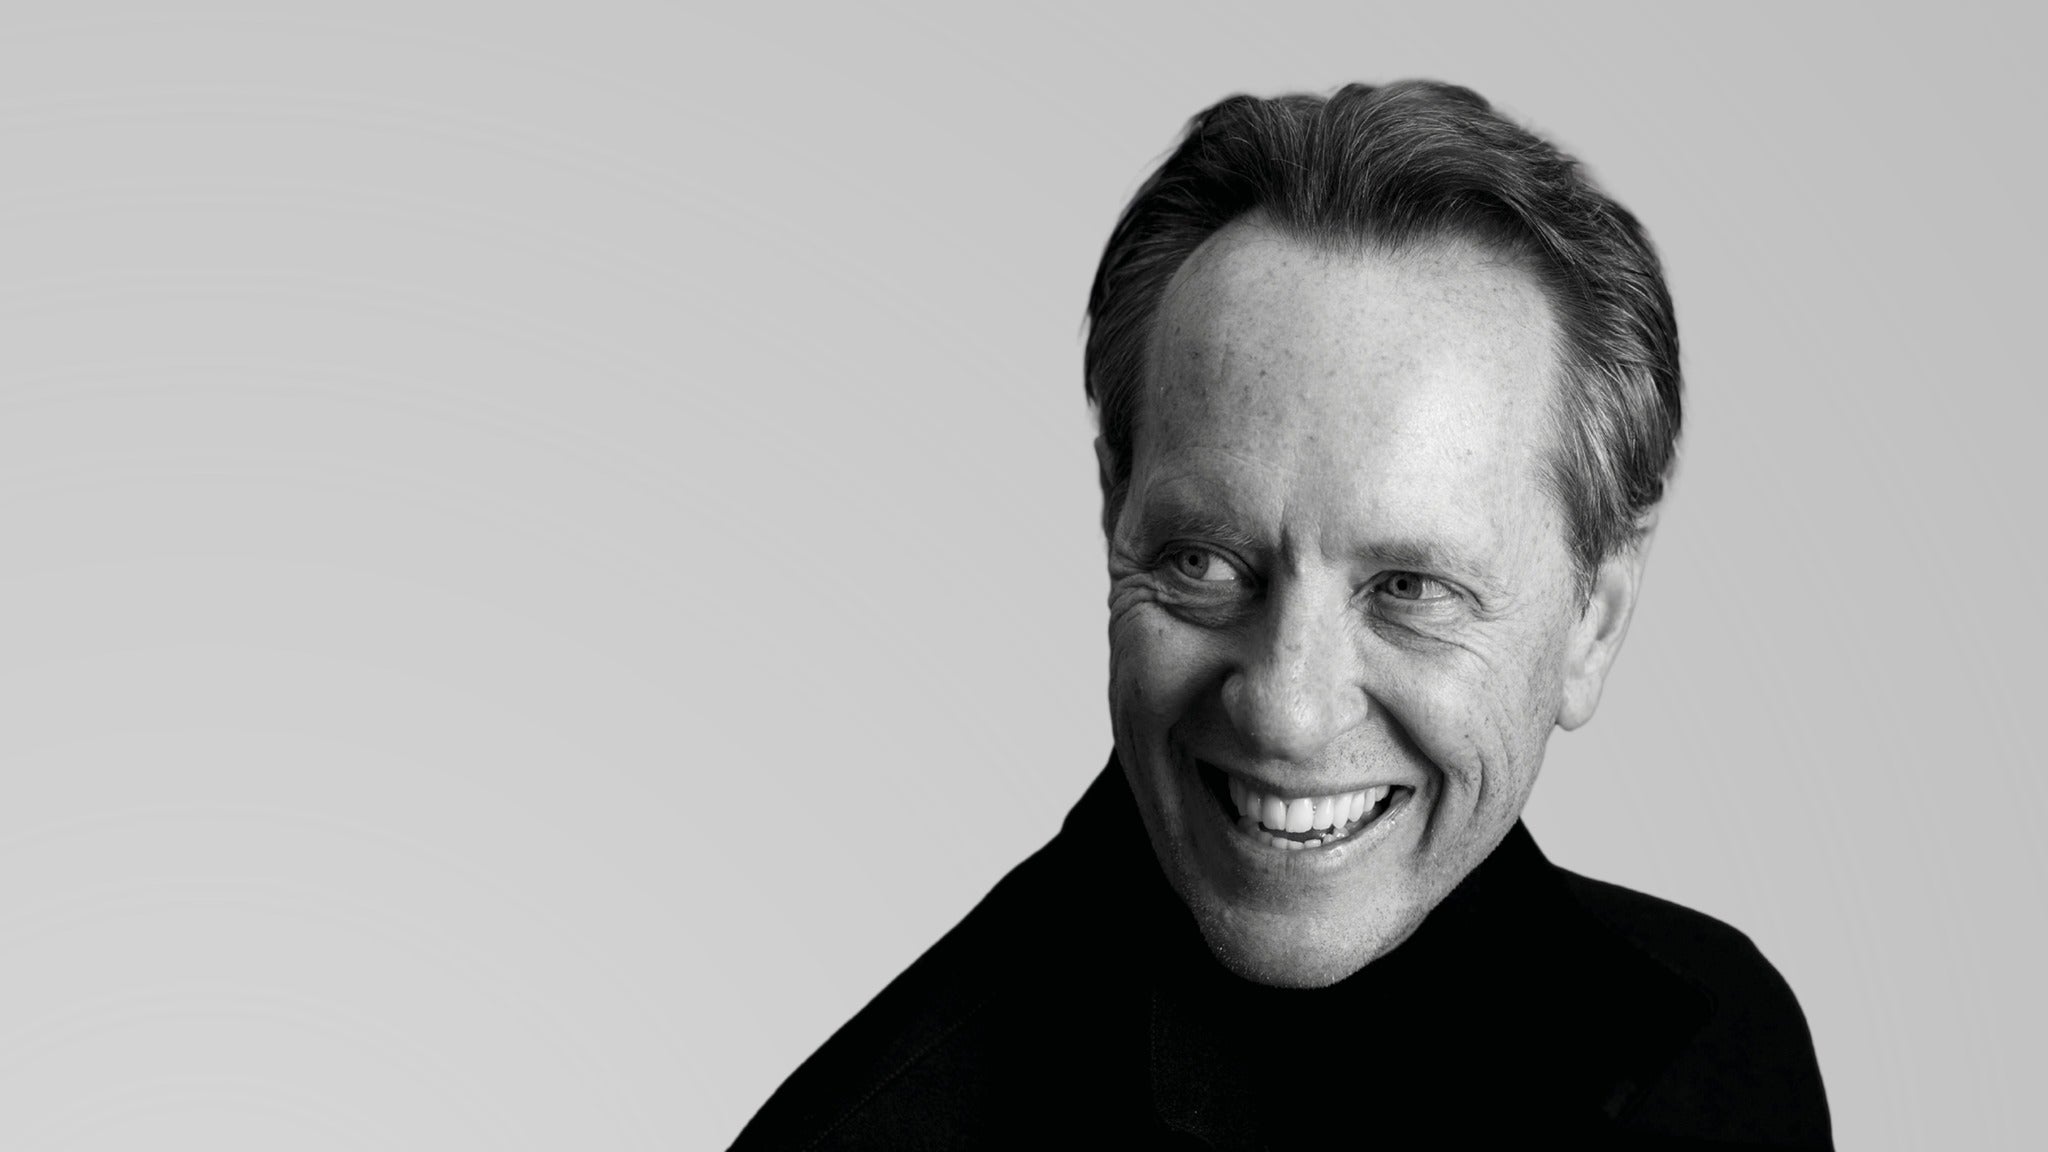 Image used with permission from Ticketmaster | An Evening with Richard E Grant tickets